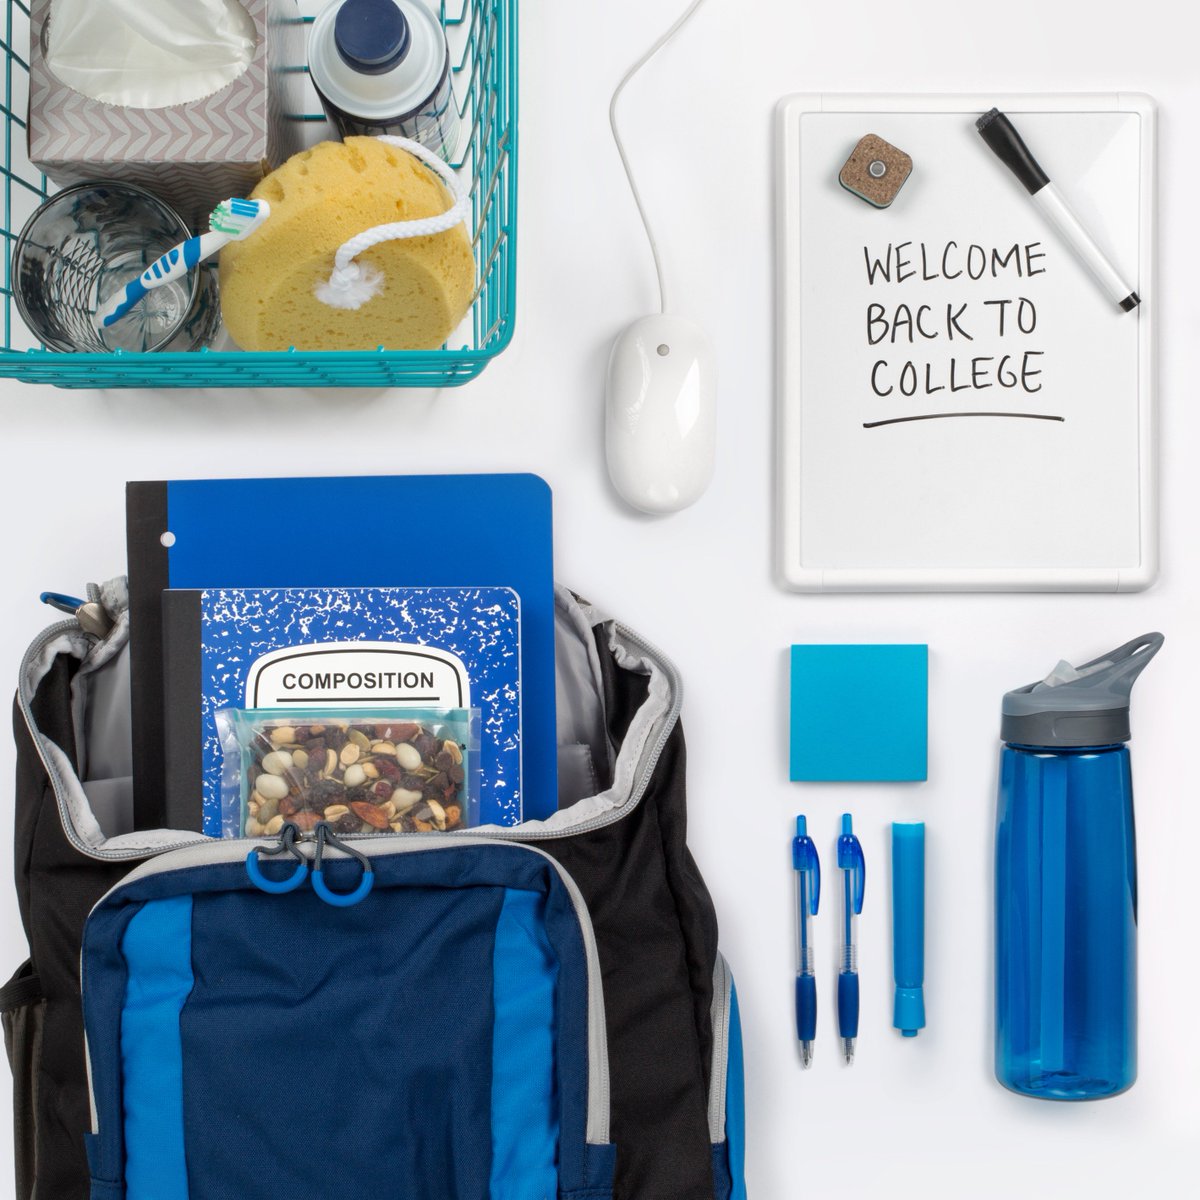 Supercuts on Twitter: "Get ready for another year of #college with this